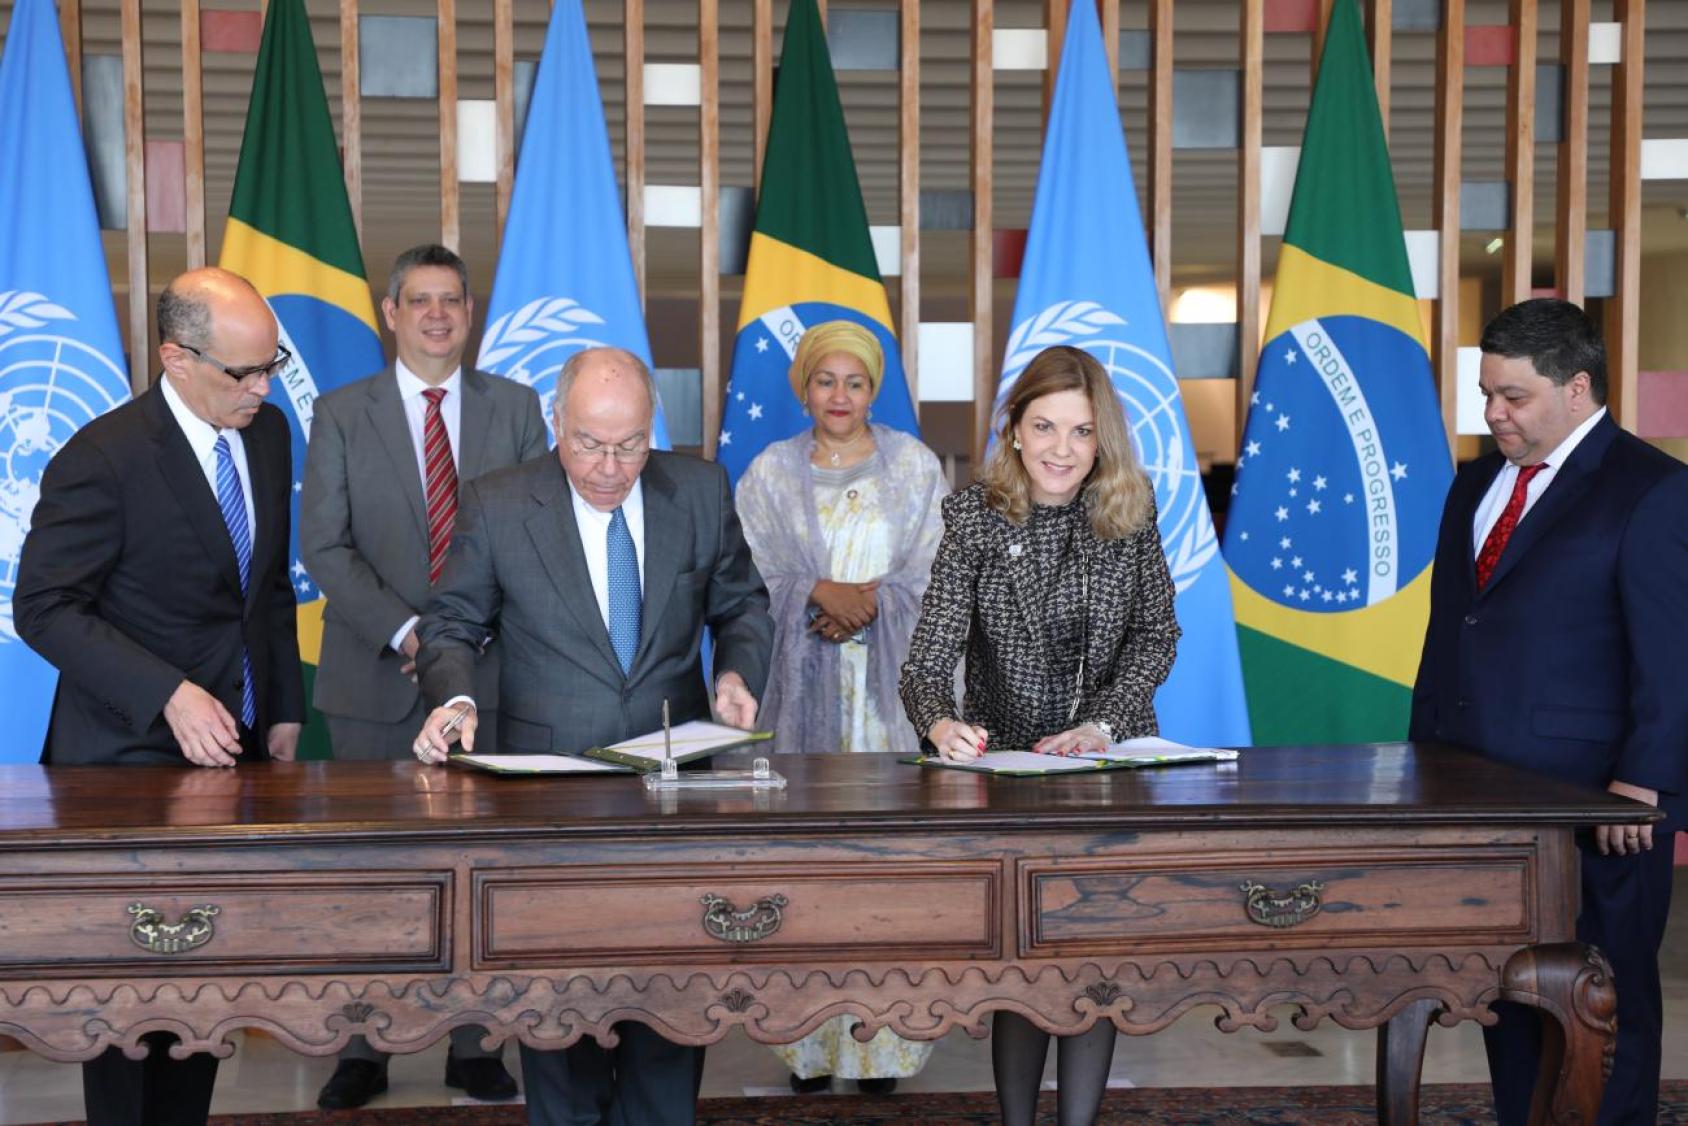 Four men and two women stand around a table where a man and a woman sign a document in front of the flags of UN and Brazil